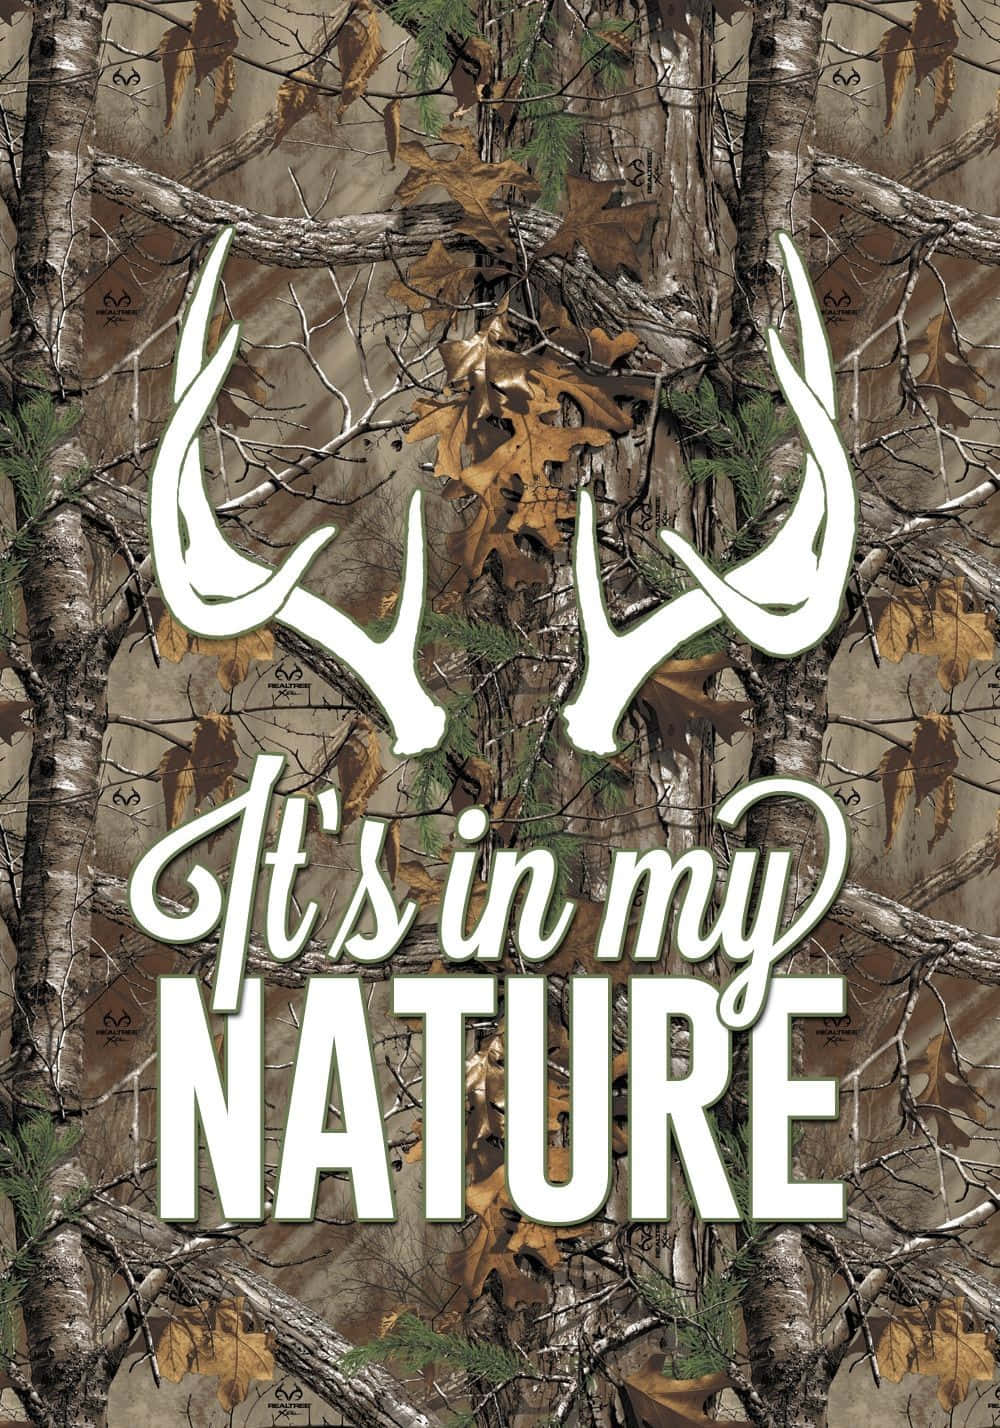 Spend your weekend immersed in nature while hunting